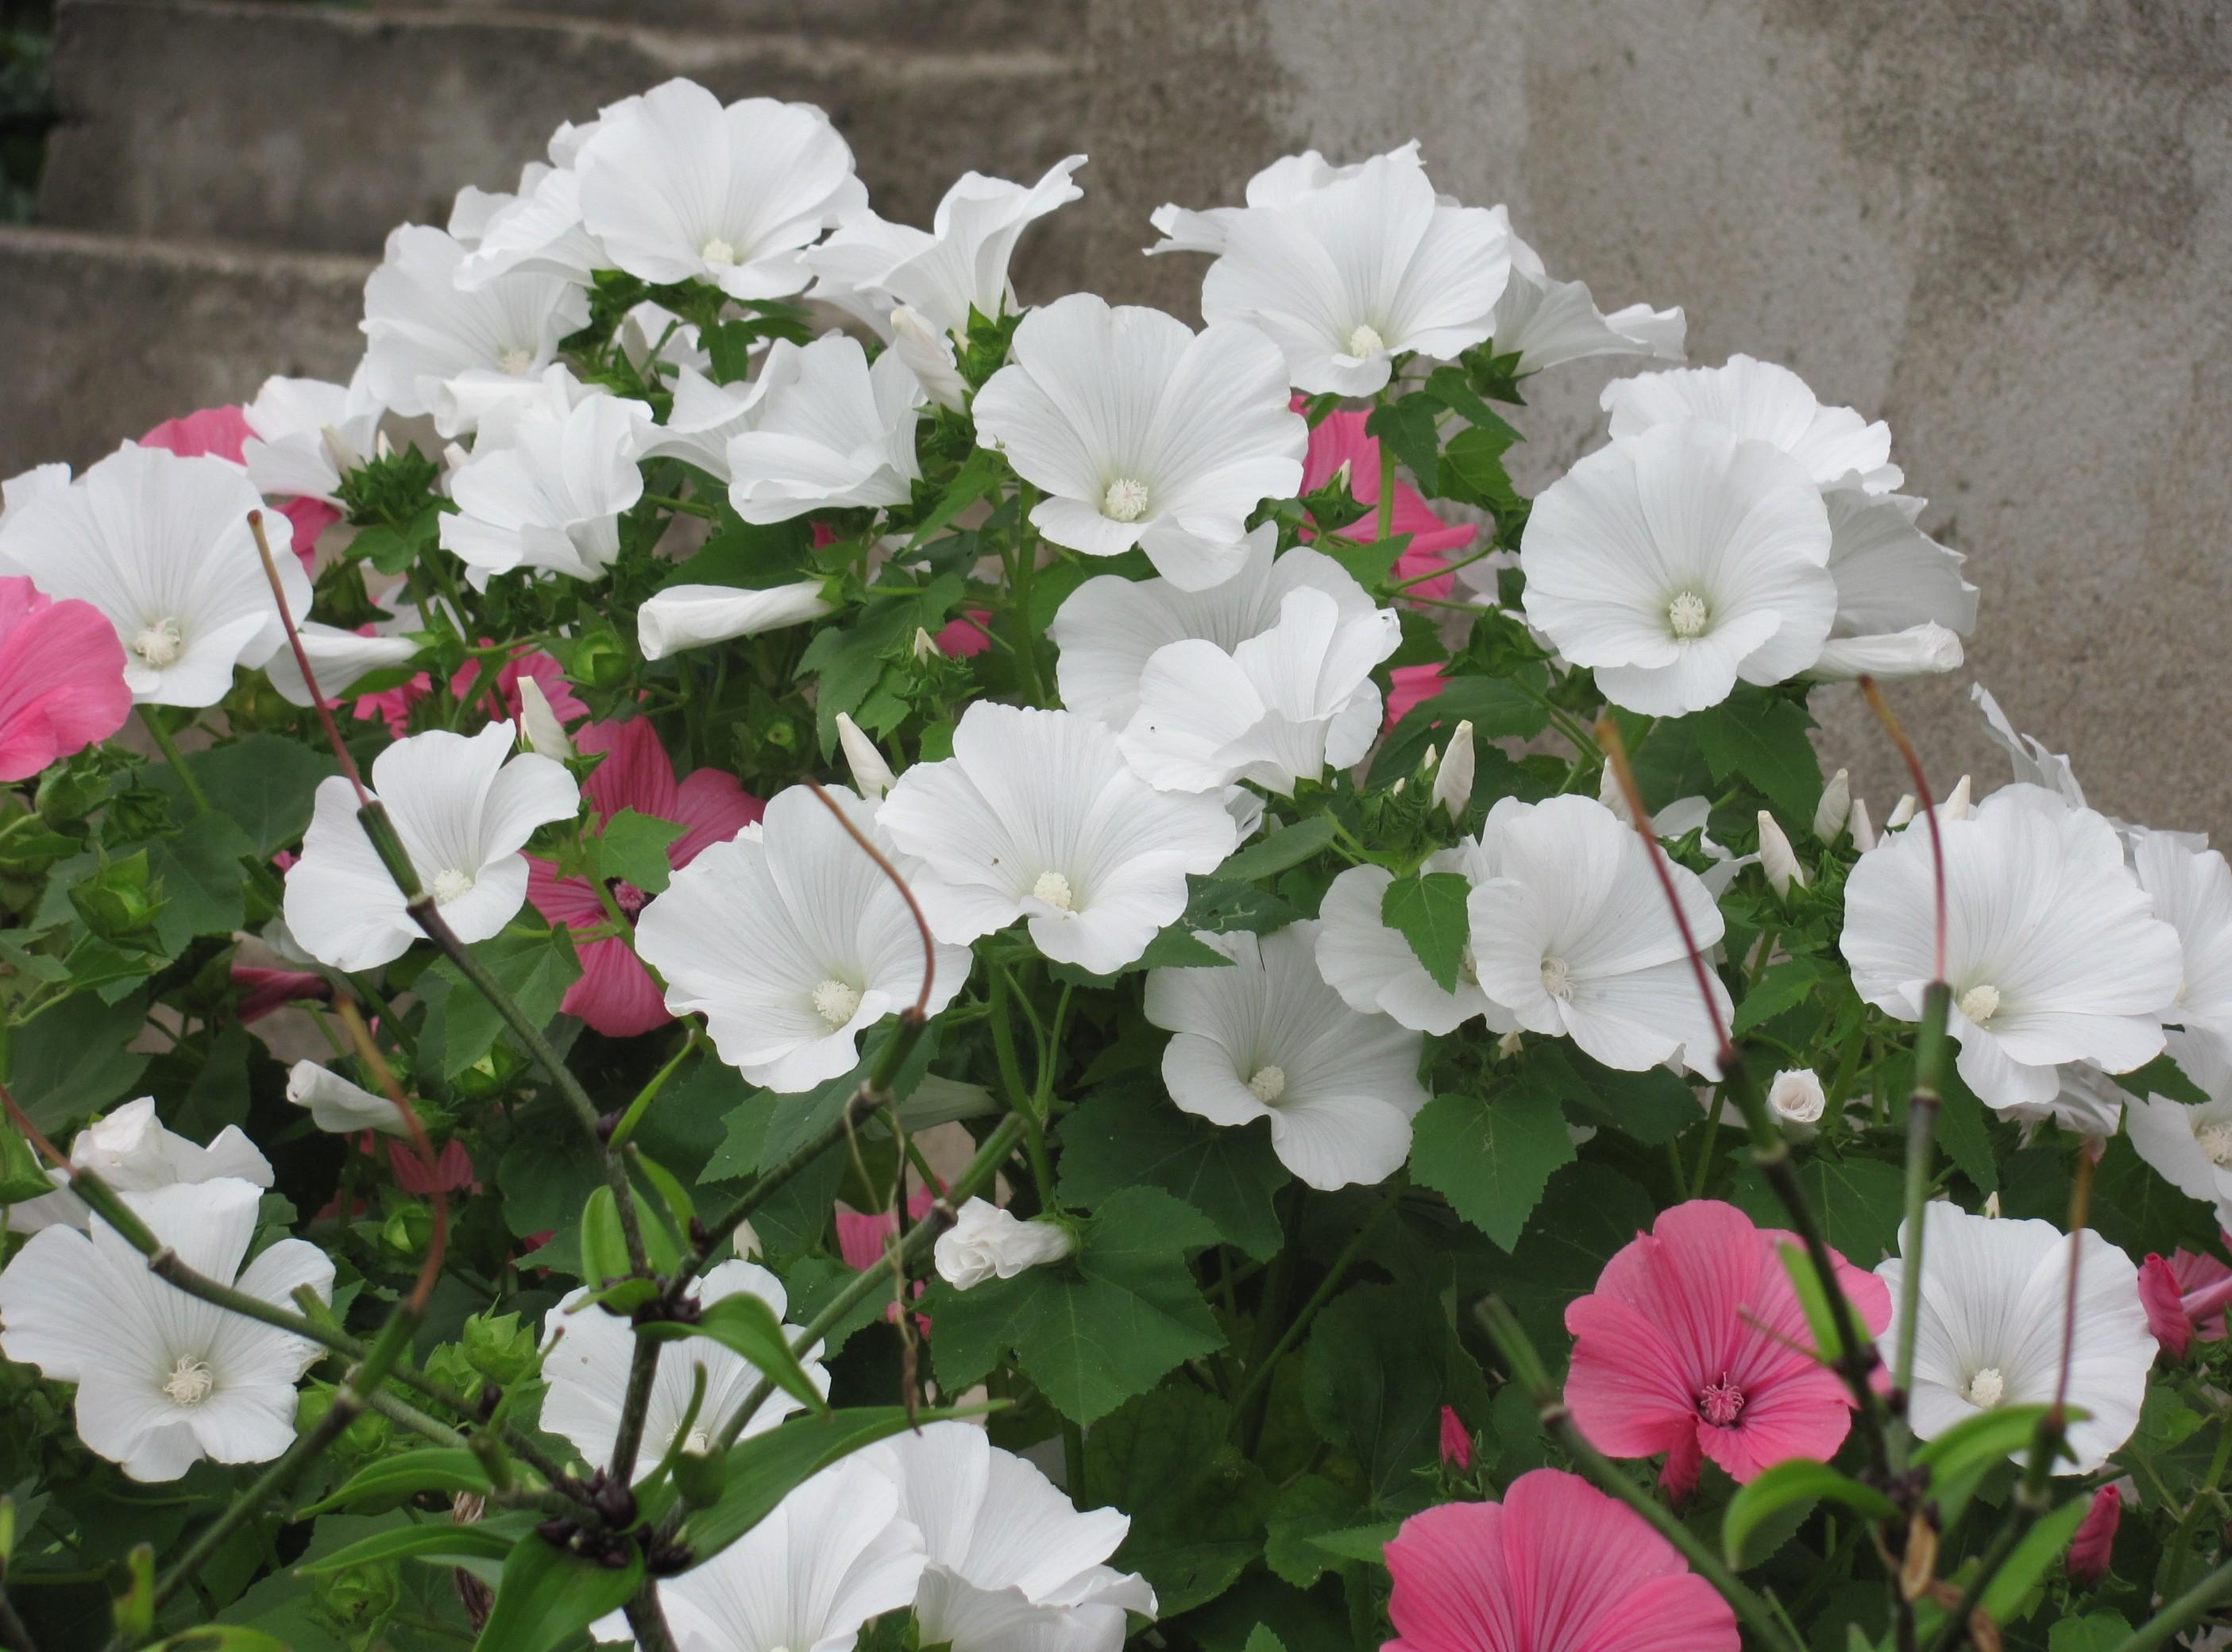 flowers, greens, flowerbed, flower bed, handsomely, it's beautiful, lavatera